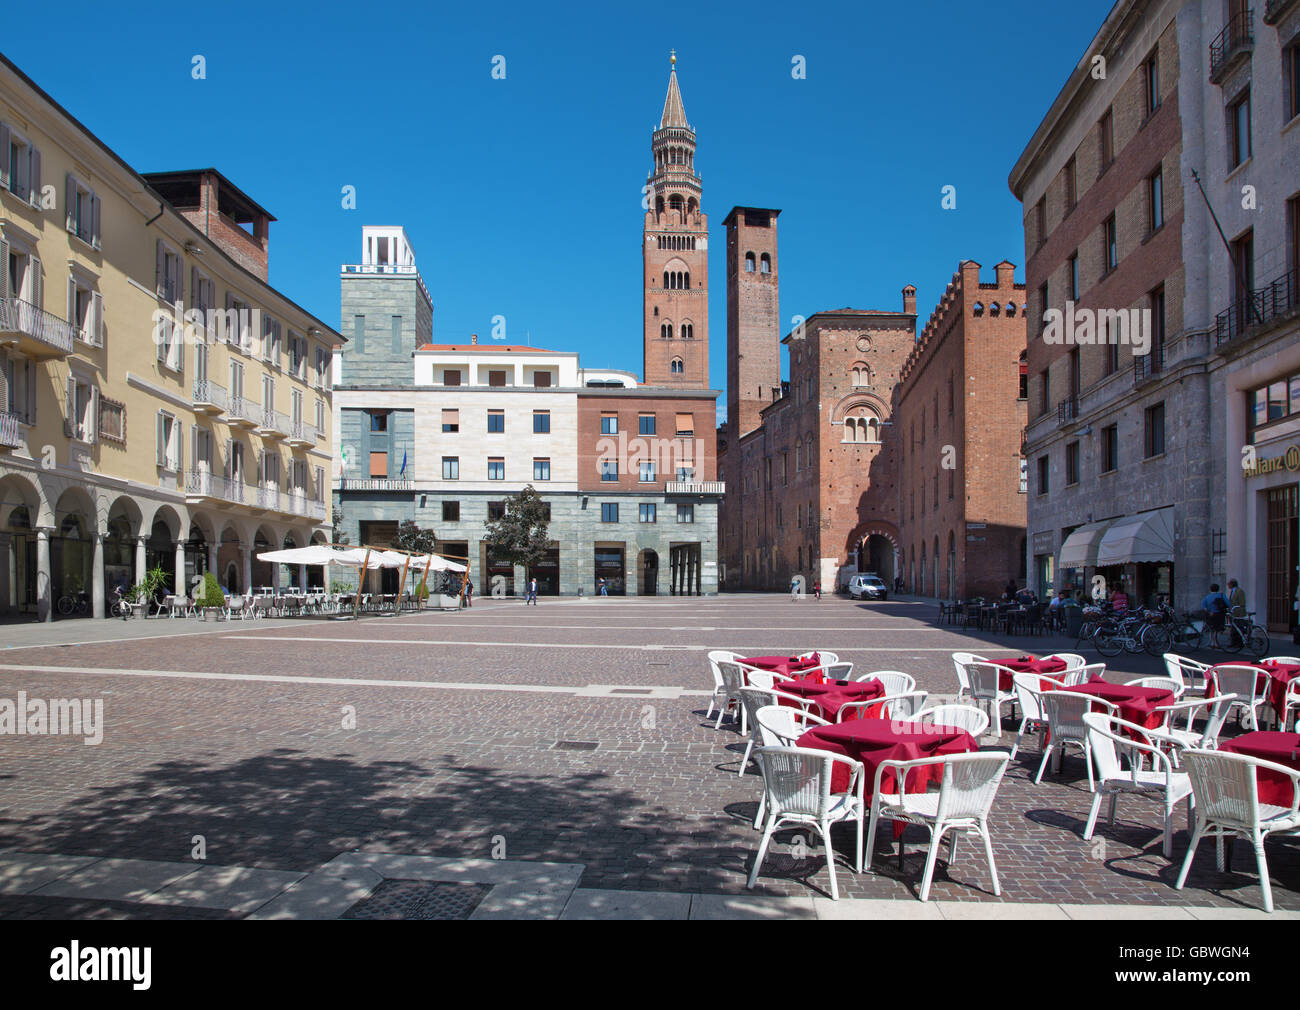 CREMONA, ITALY - MAY 24, 2016: The Piazza Cavour square. Stock Photo